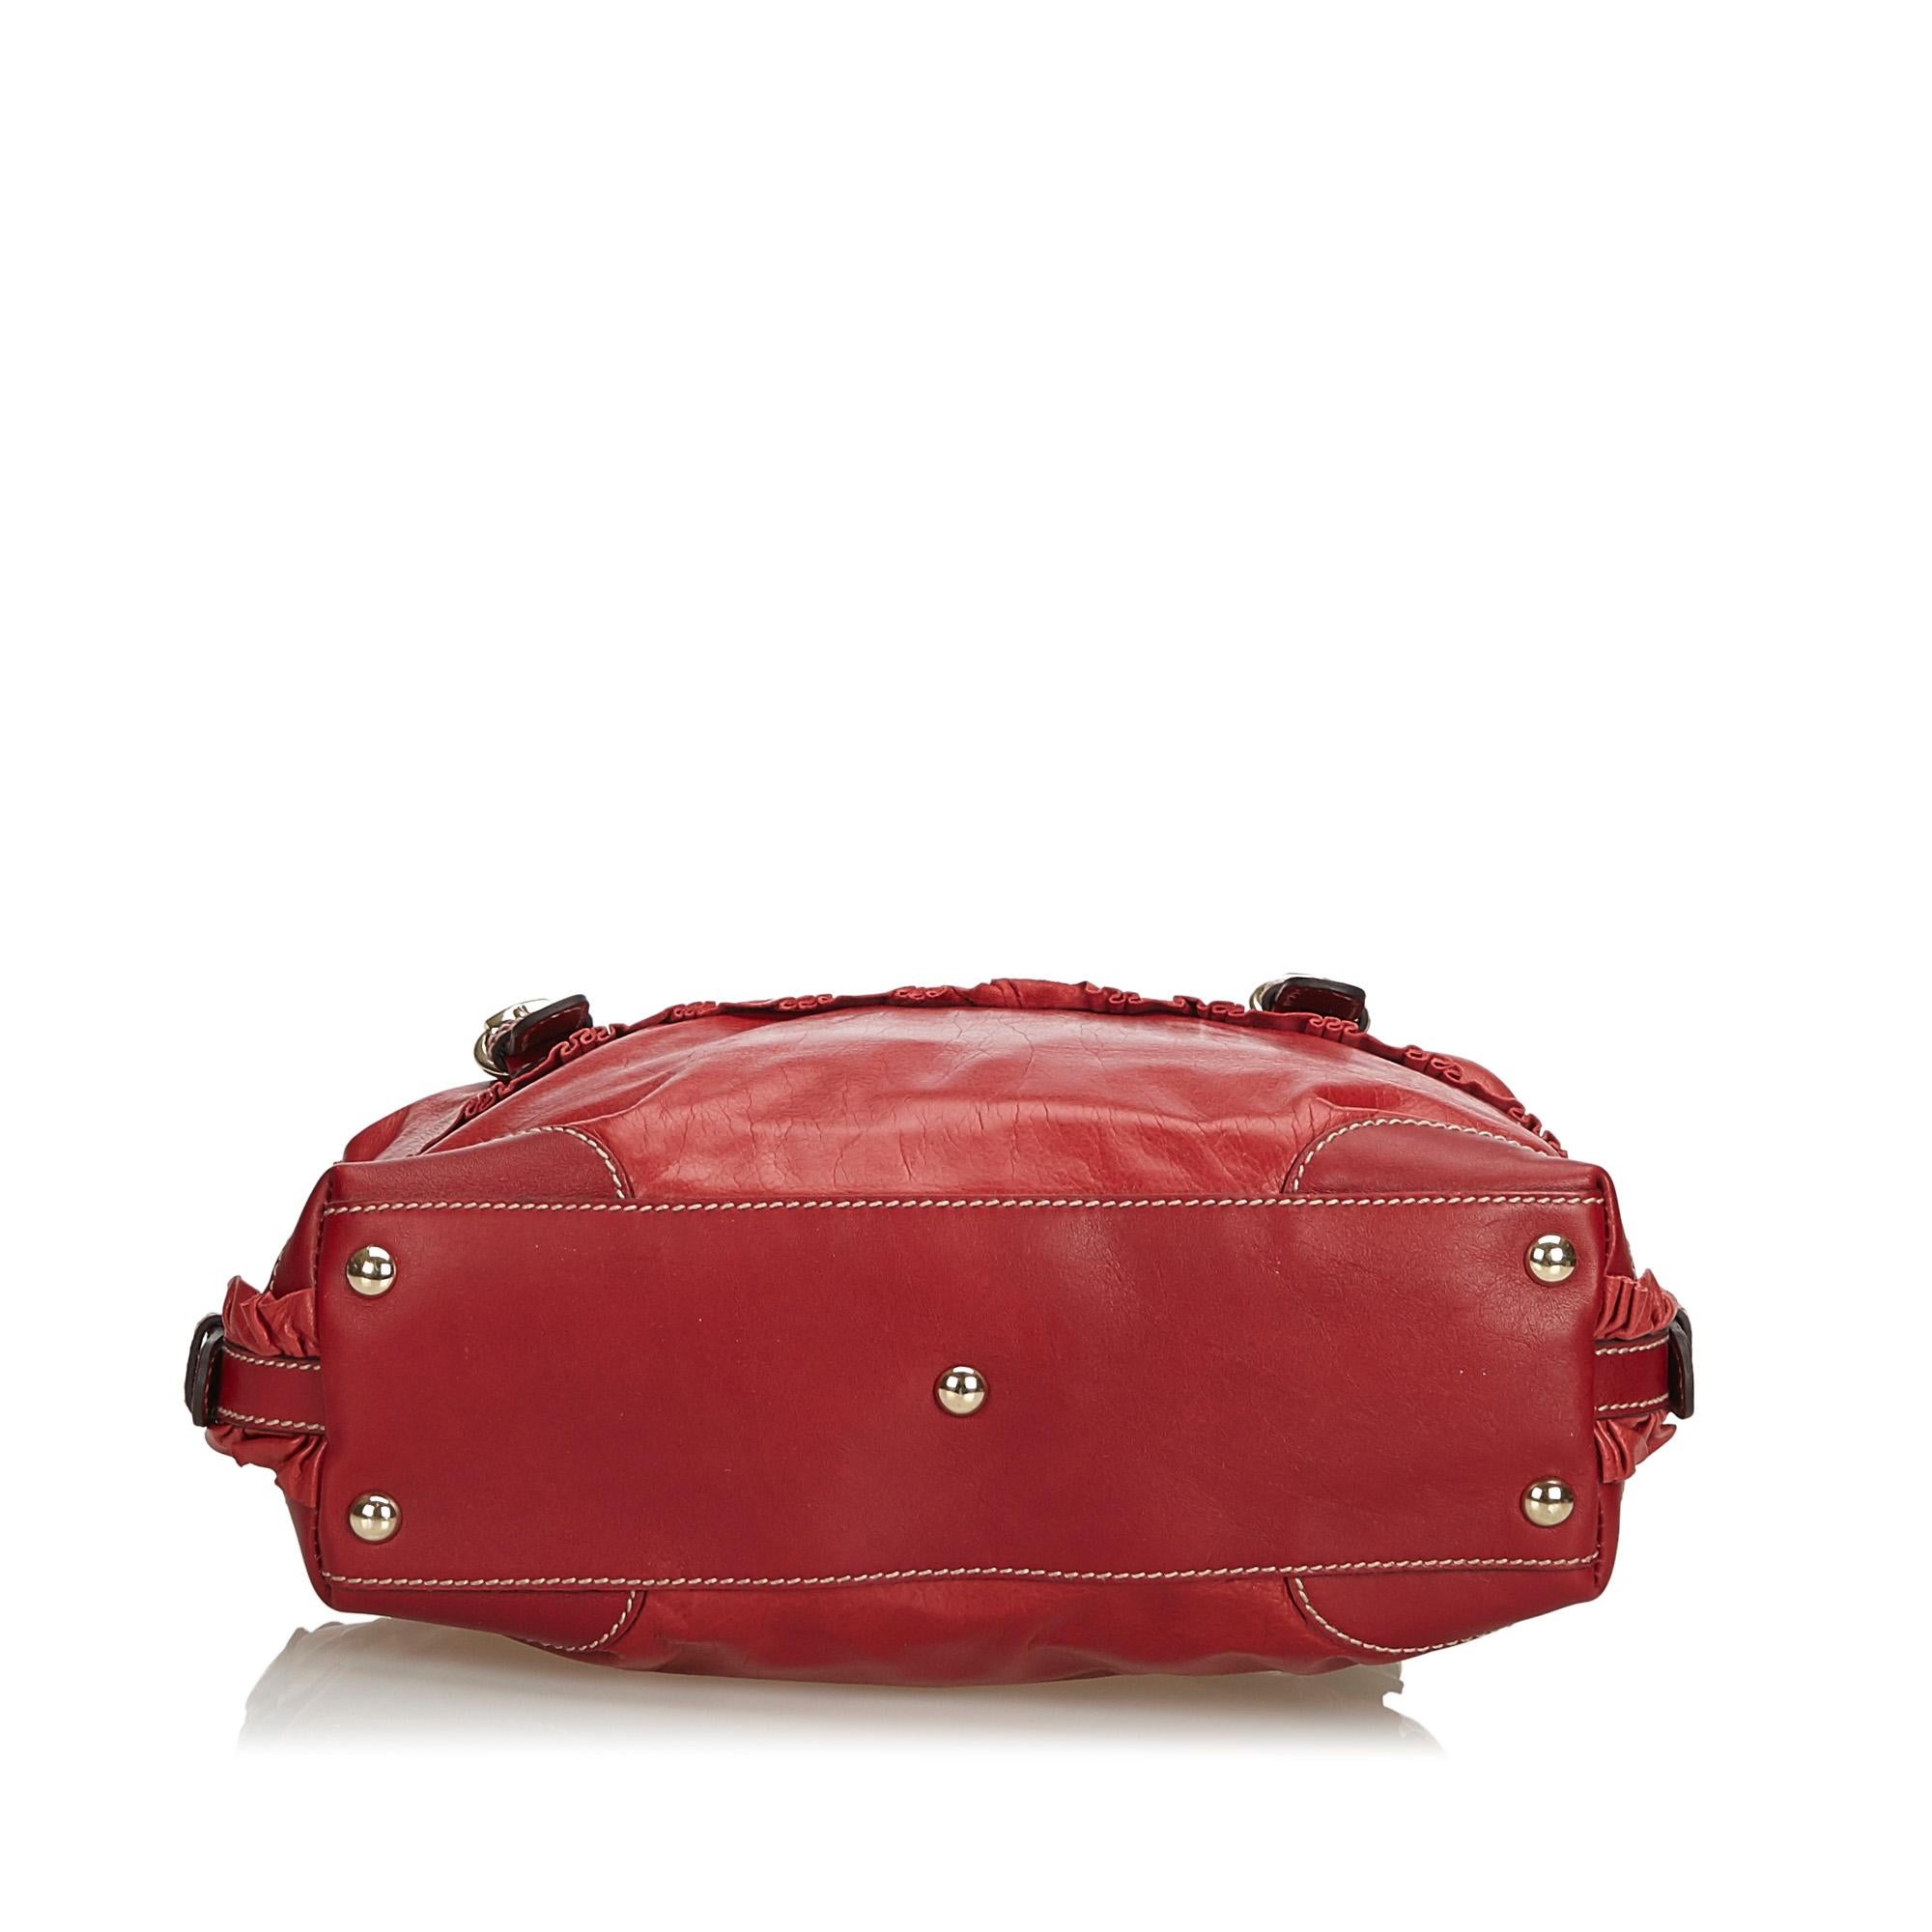 Women's Gucci Red Leather Small Sabrina Top Handle Bag